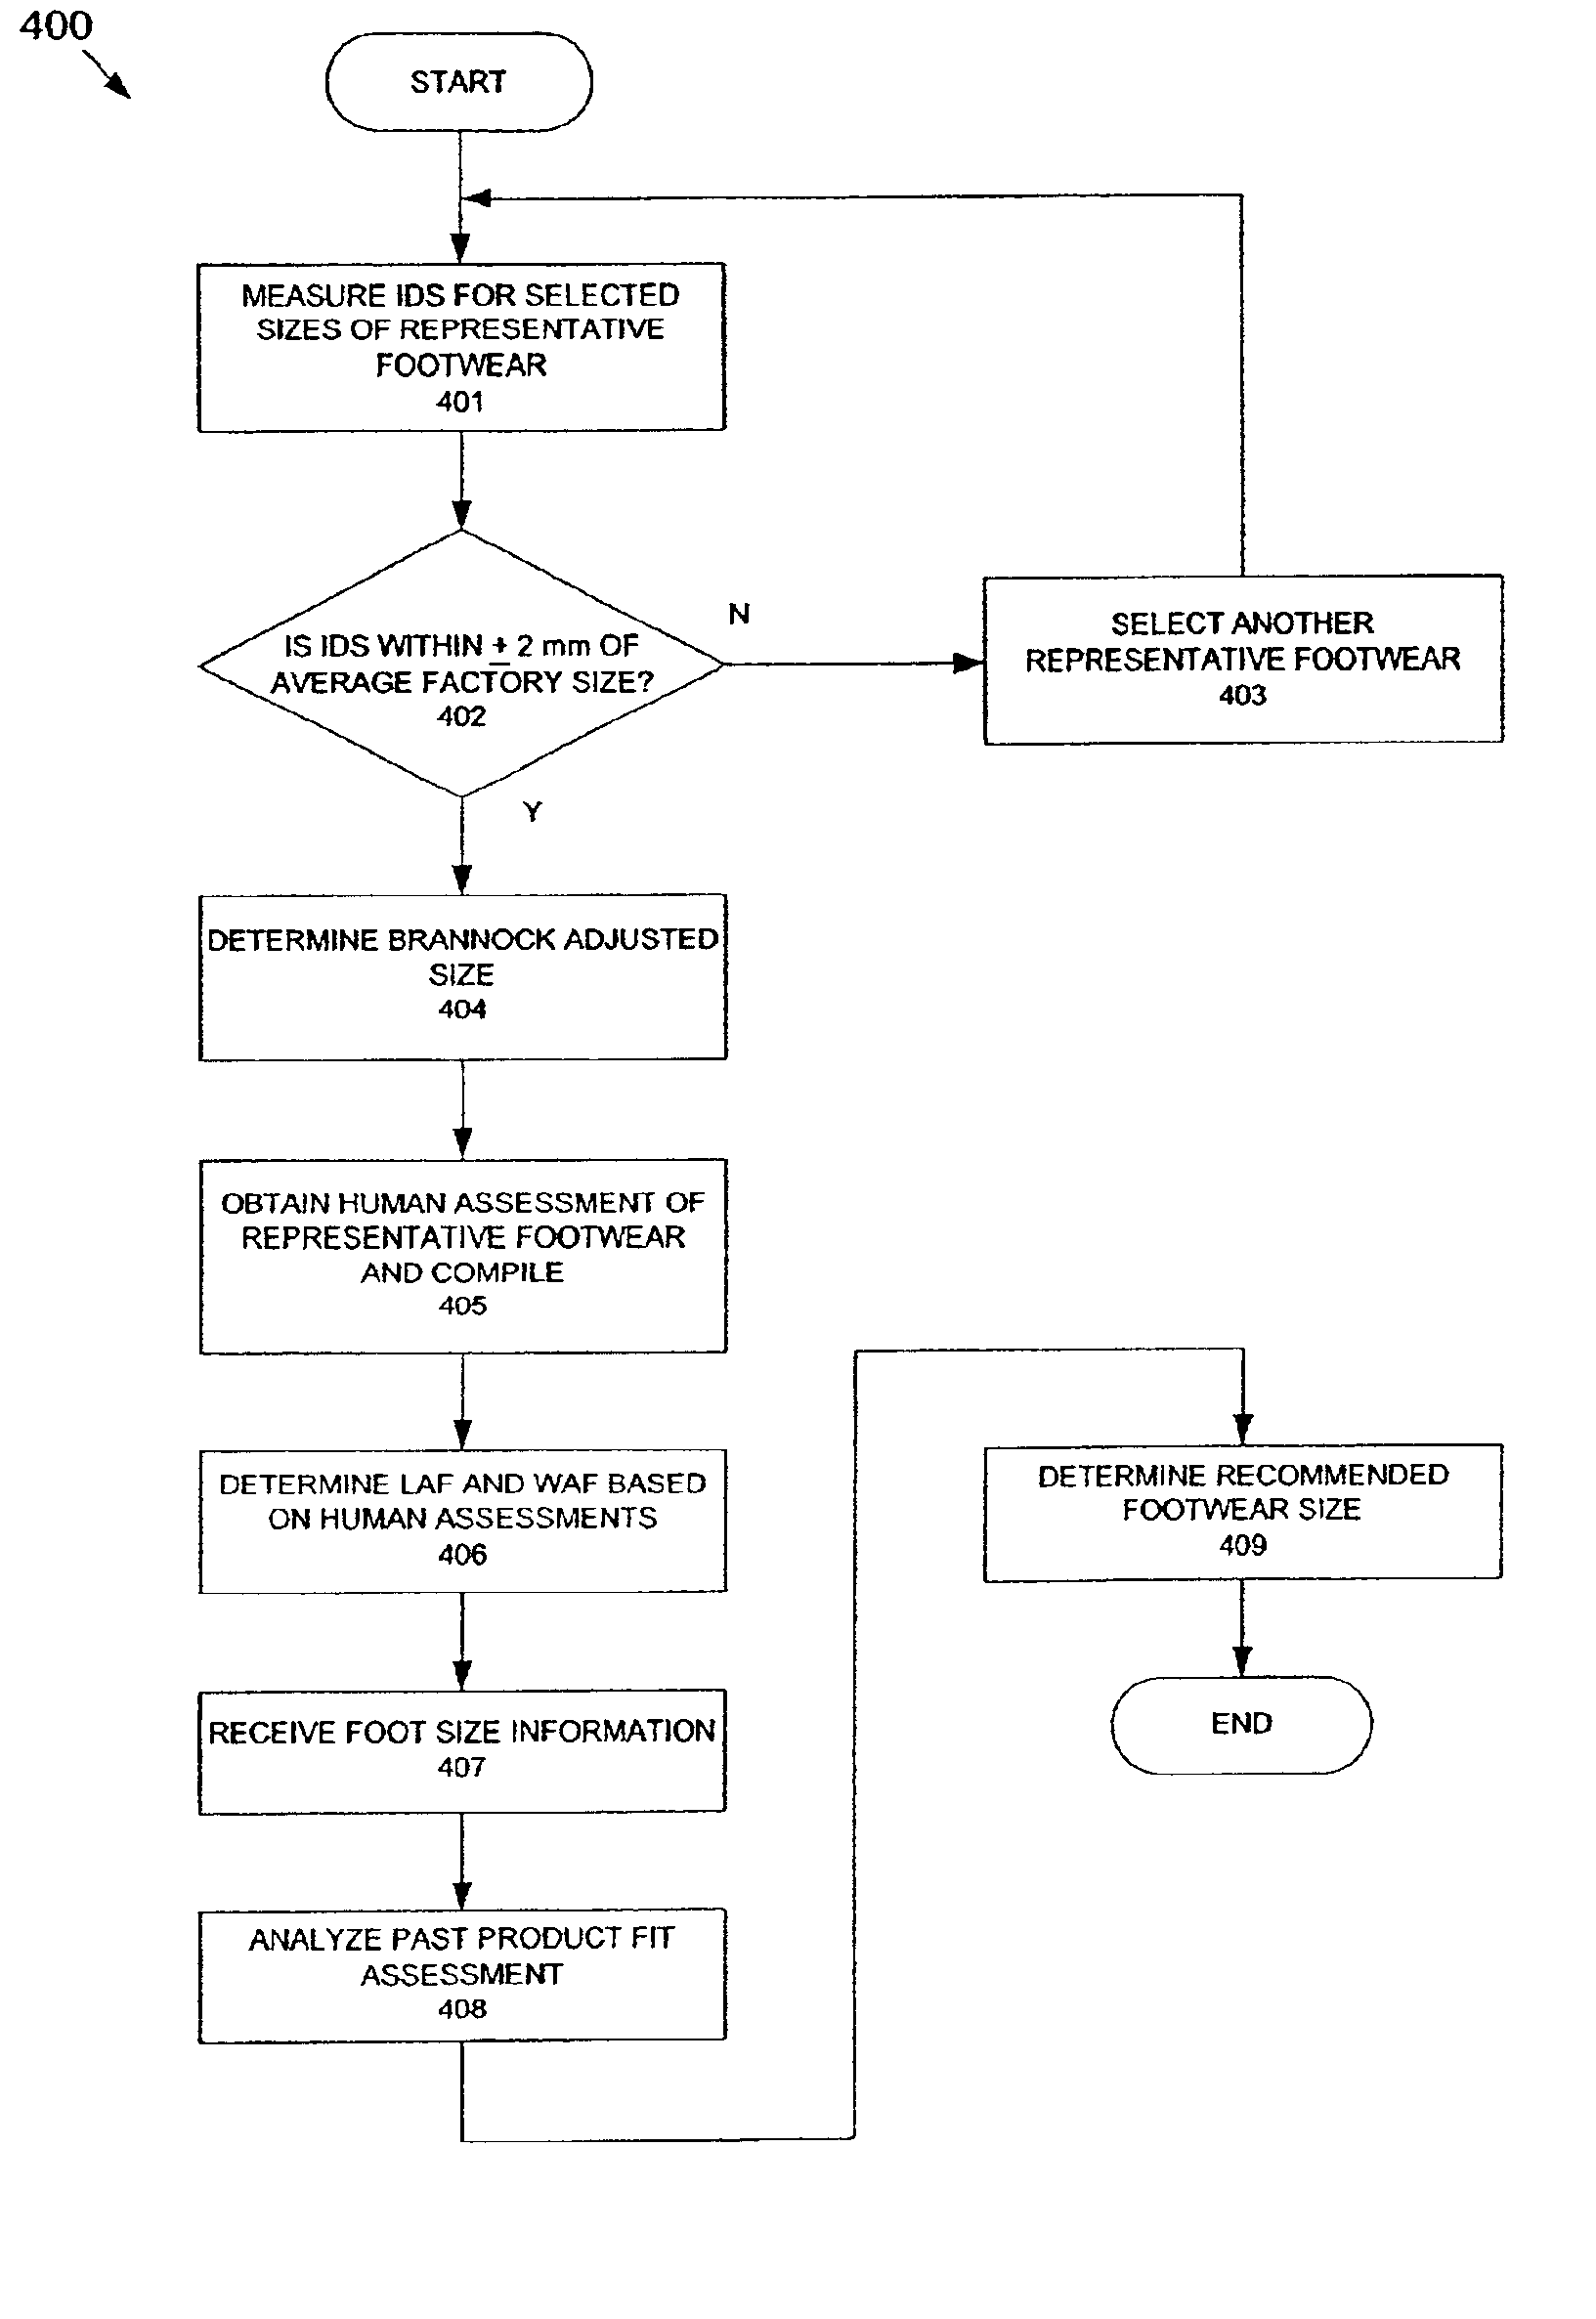 System and method for sizing footwear over a computer network